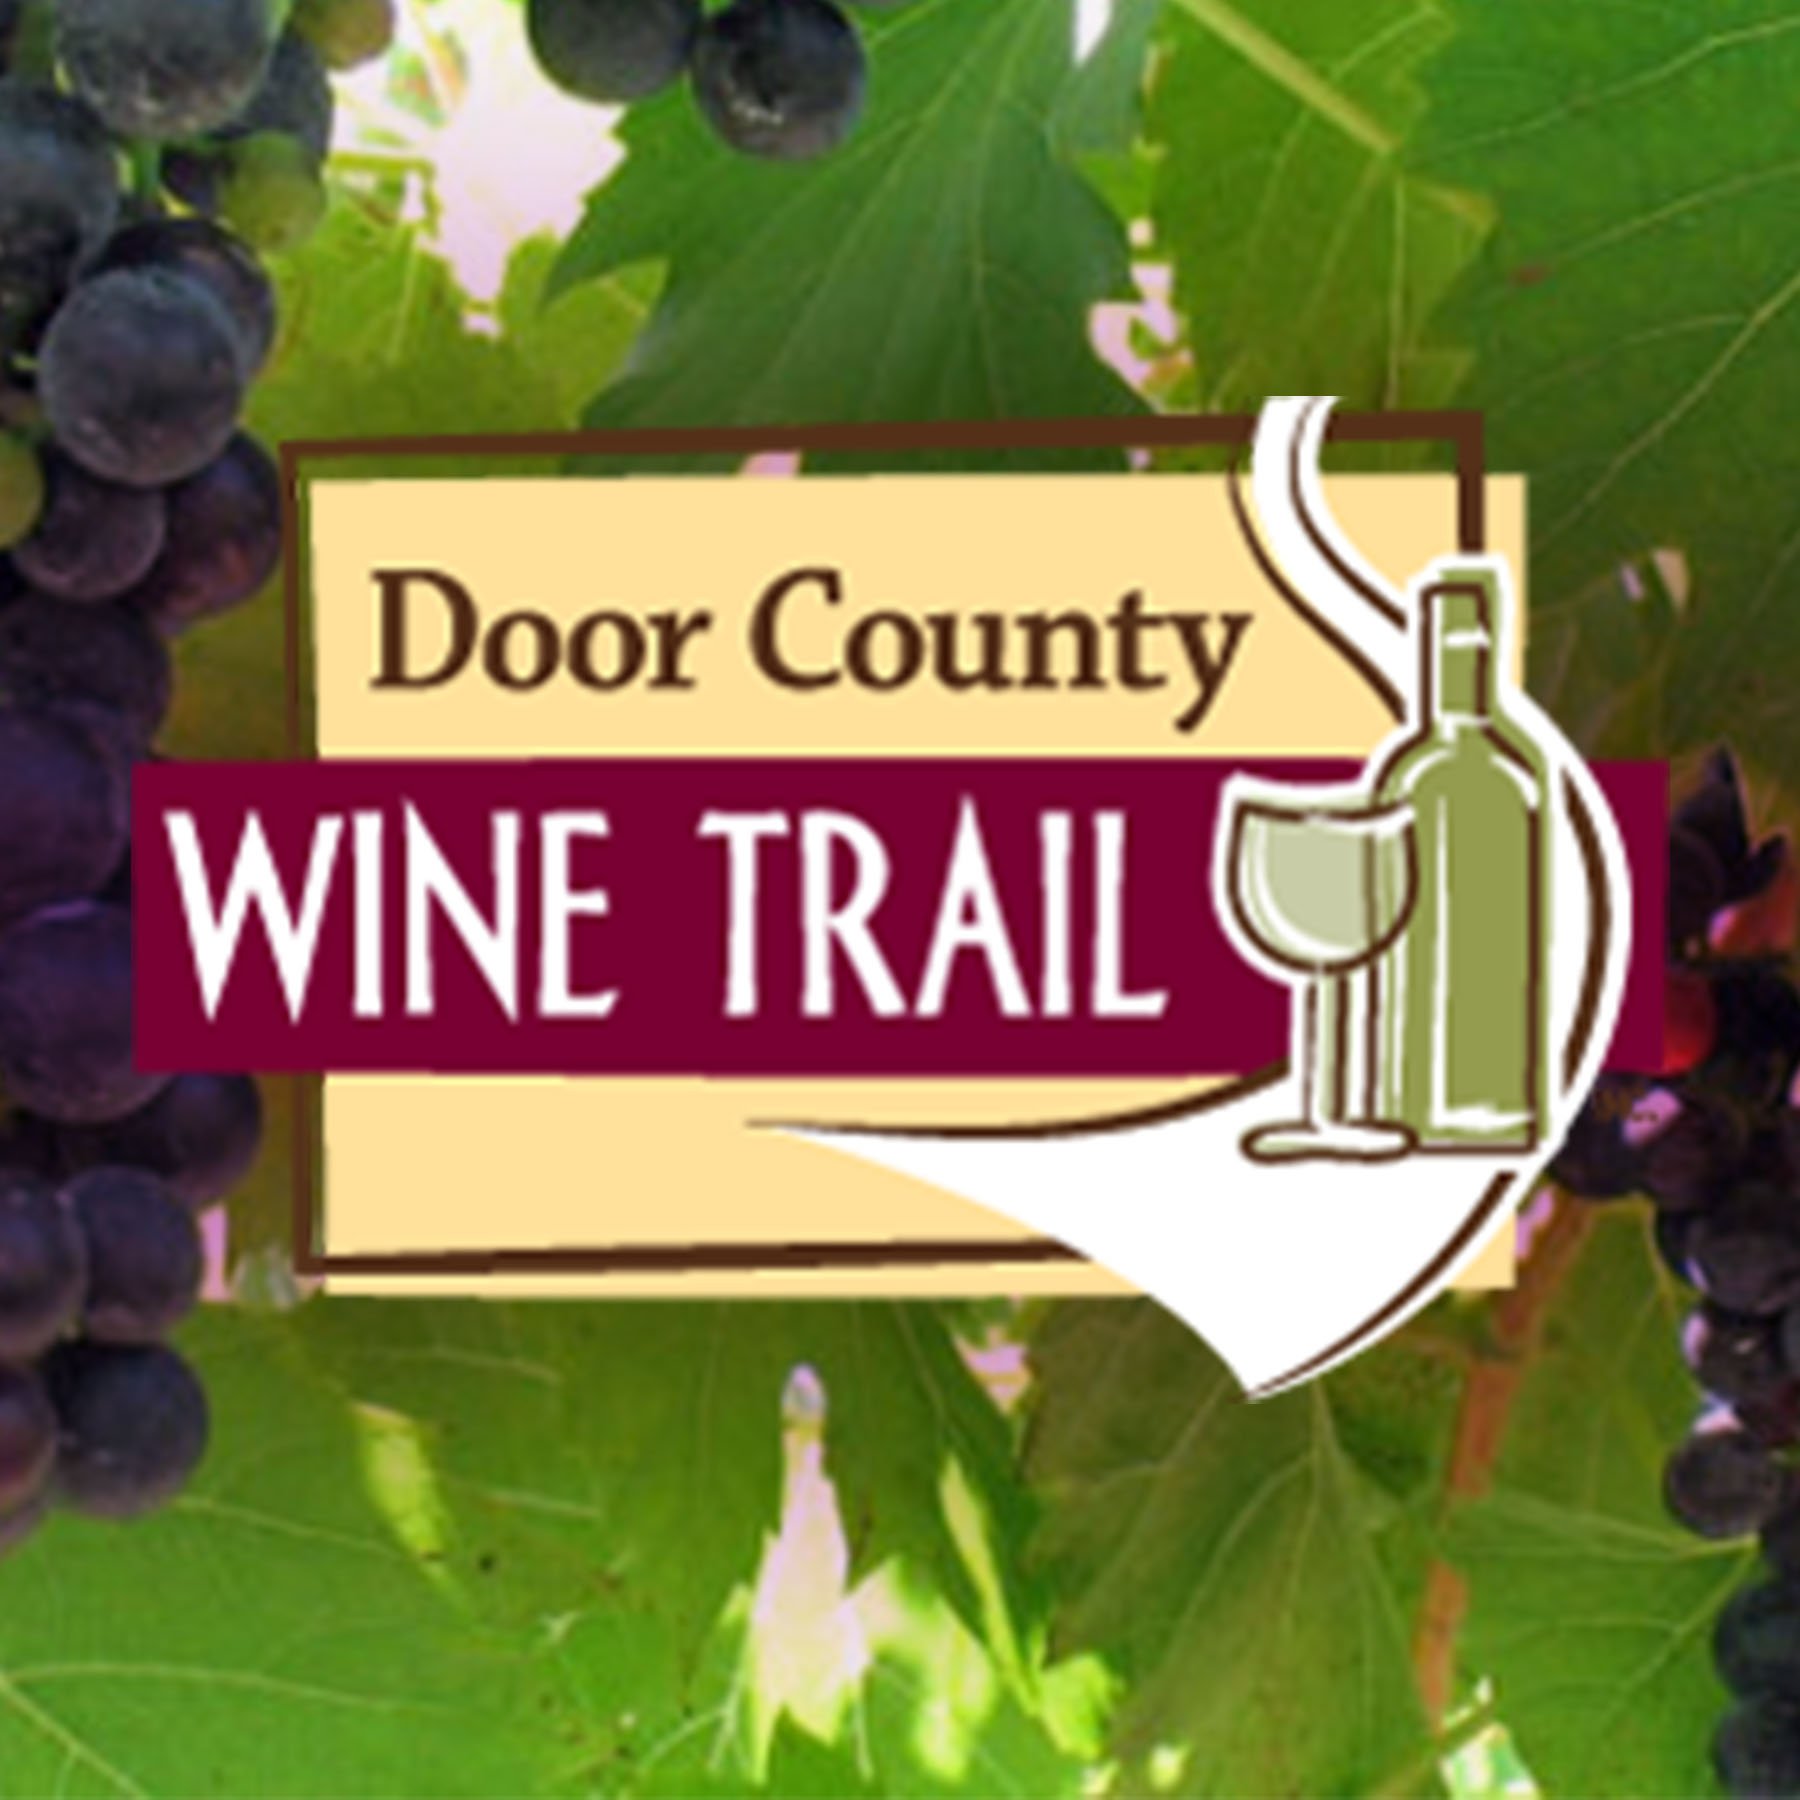 Experience #DoorCounty one sip at a time by visiting eight award-winning wineries on the Door County Wine Trail! #wine #winery #doorcountywinetrail